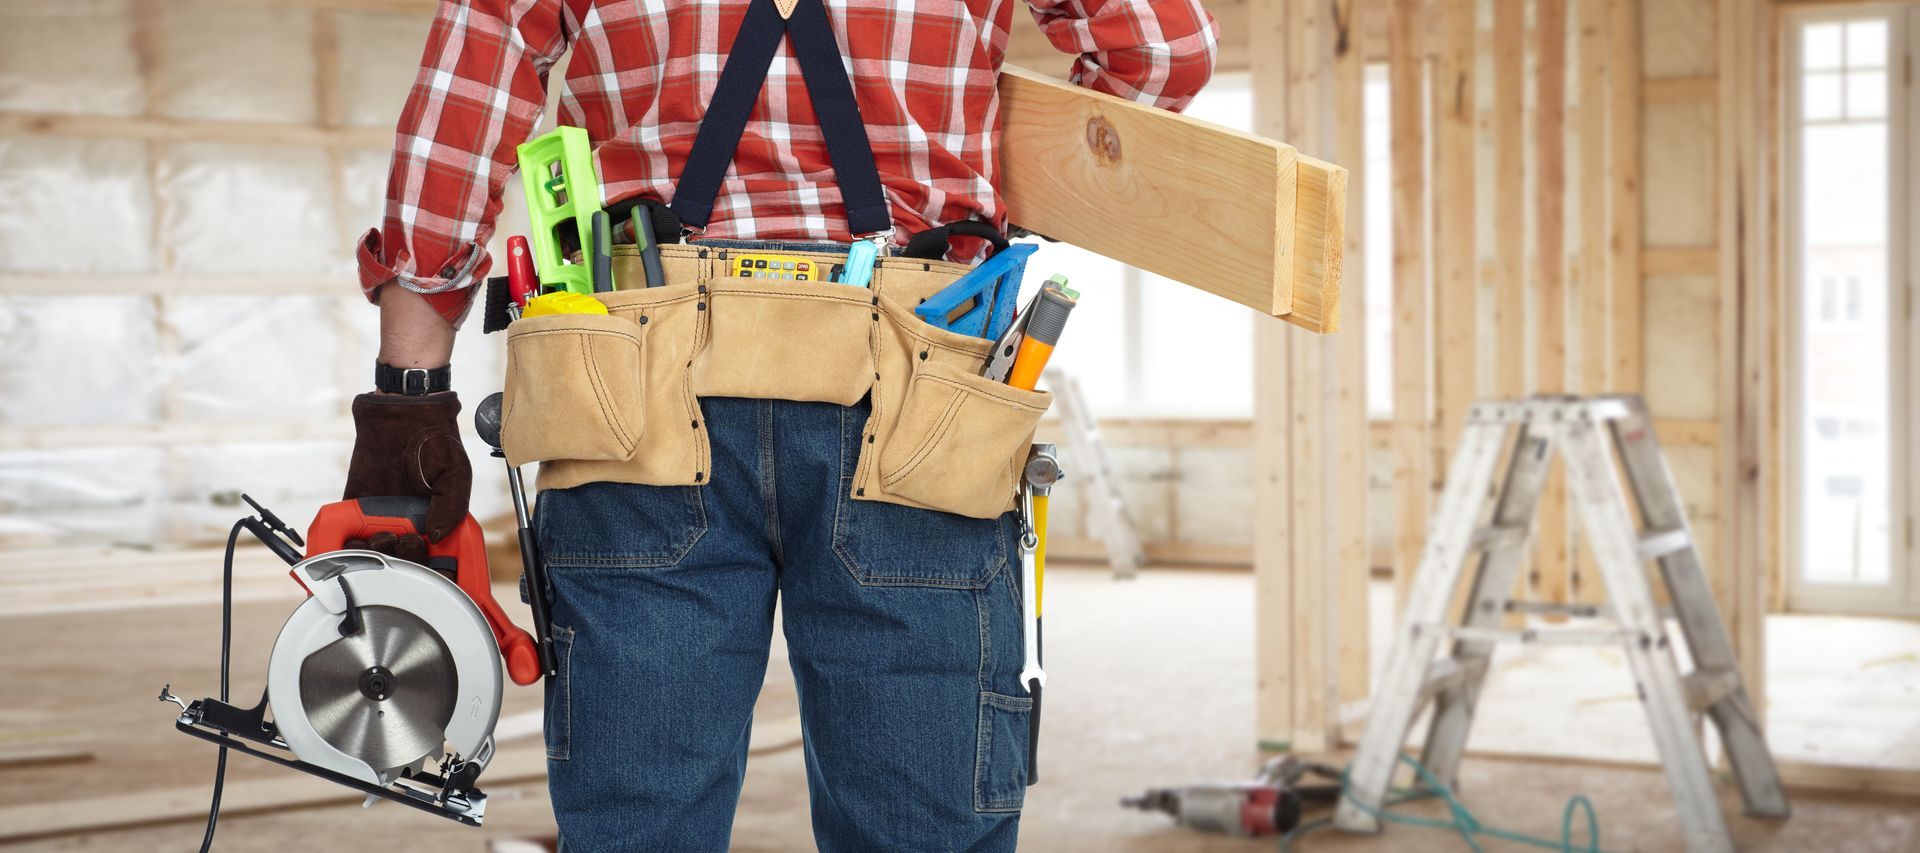 How to hire a handyman for interior carpentry projects | Mister Remodel